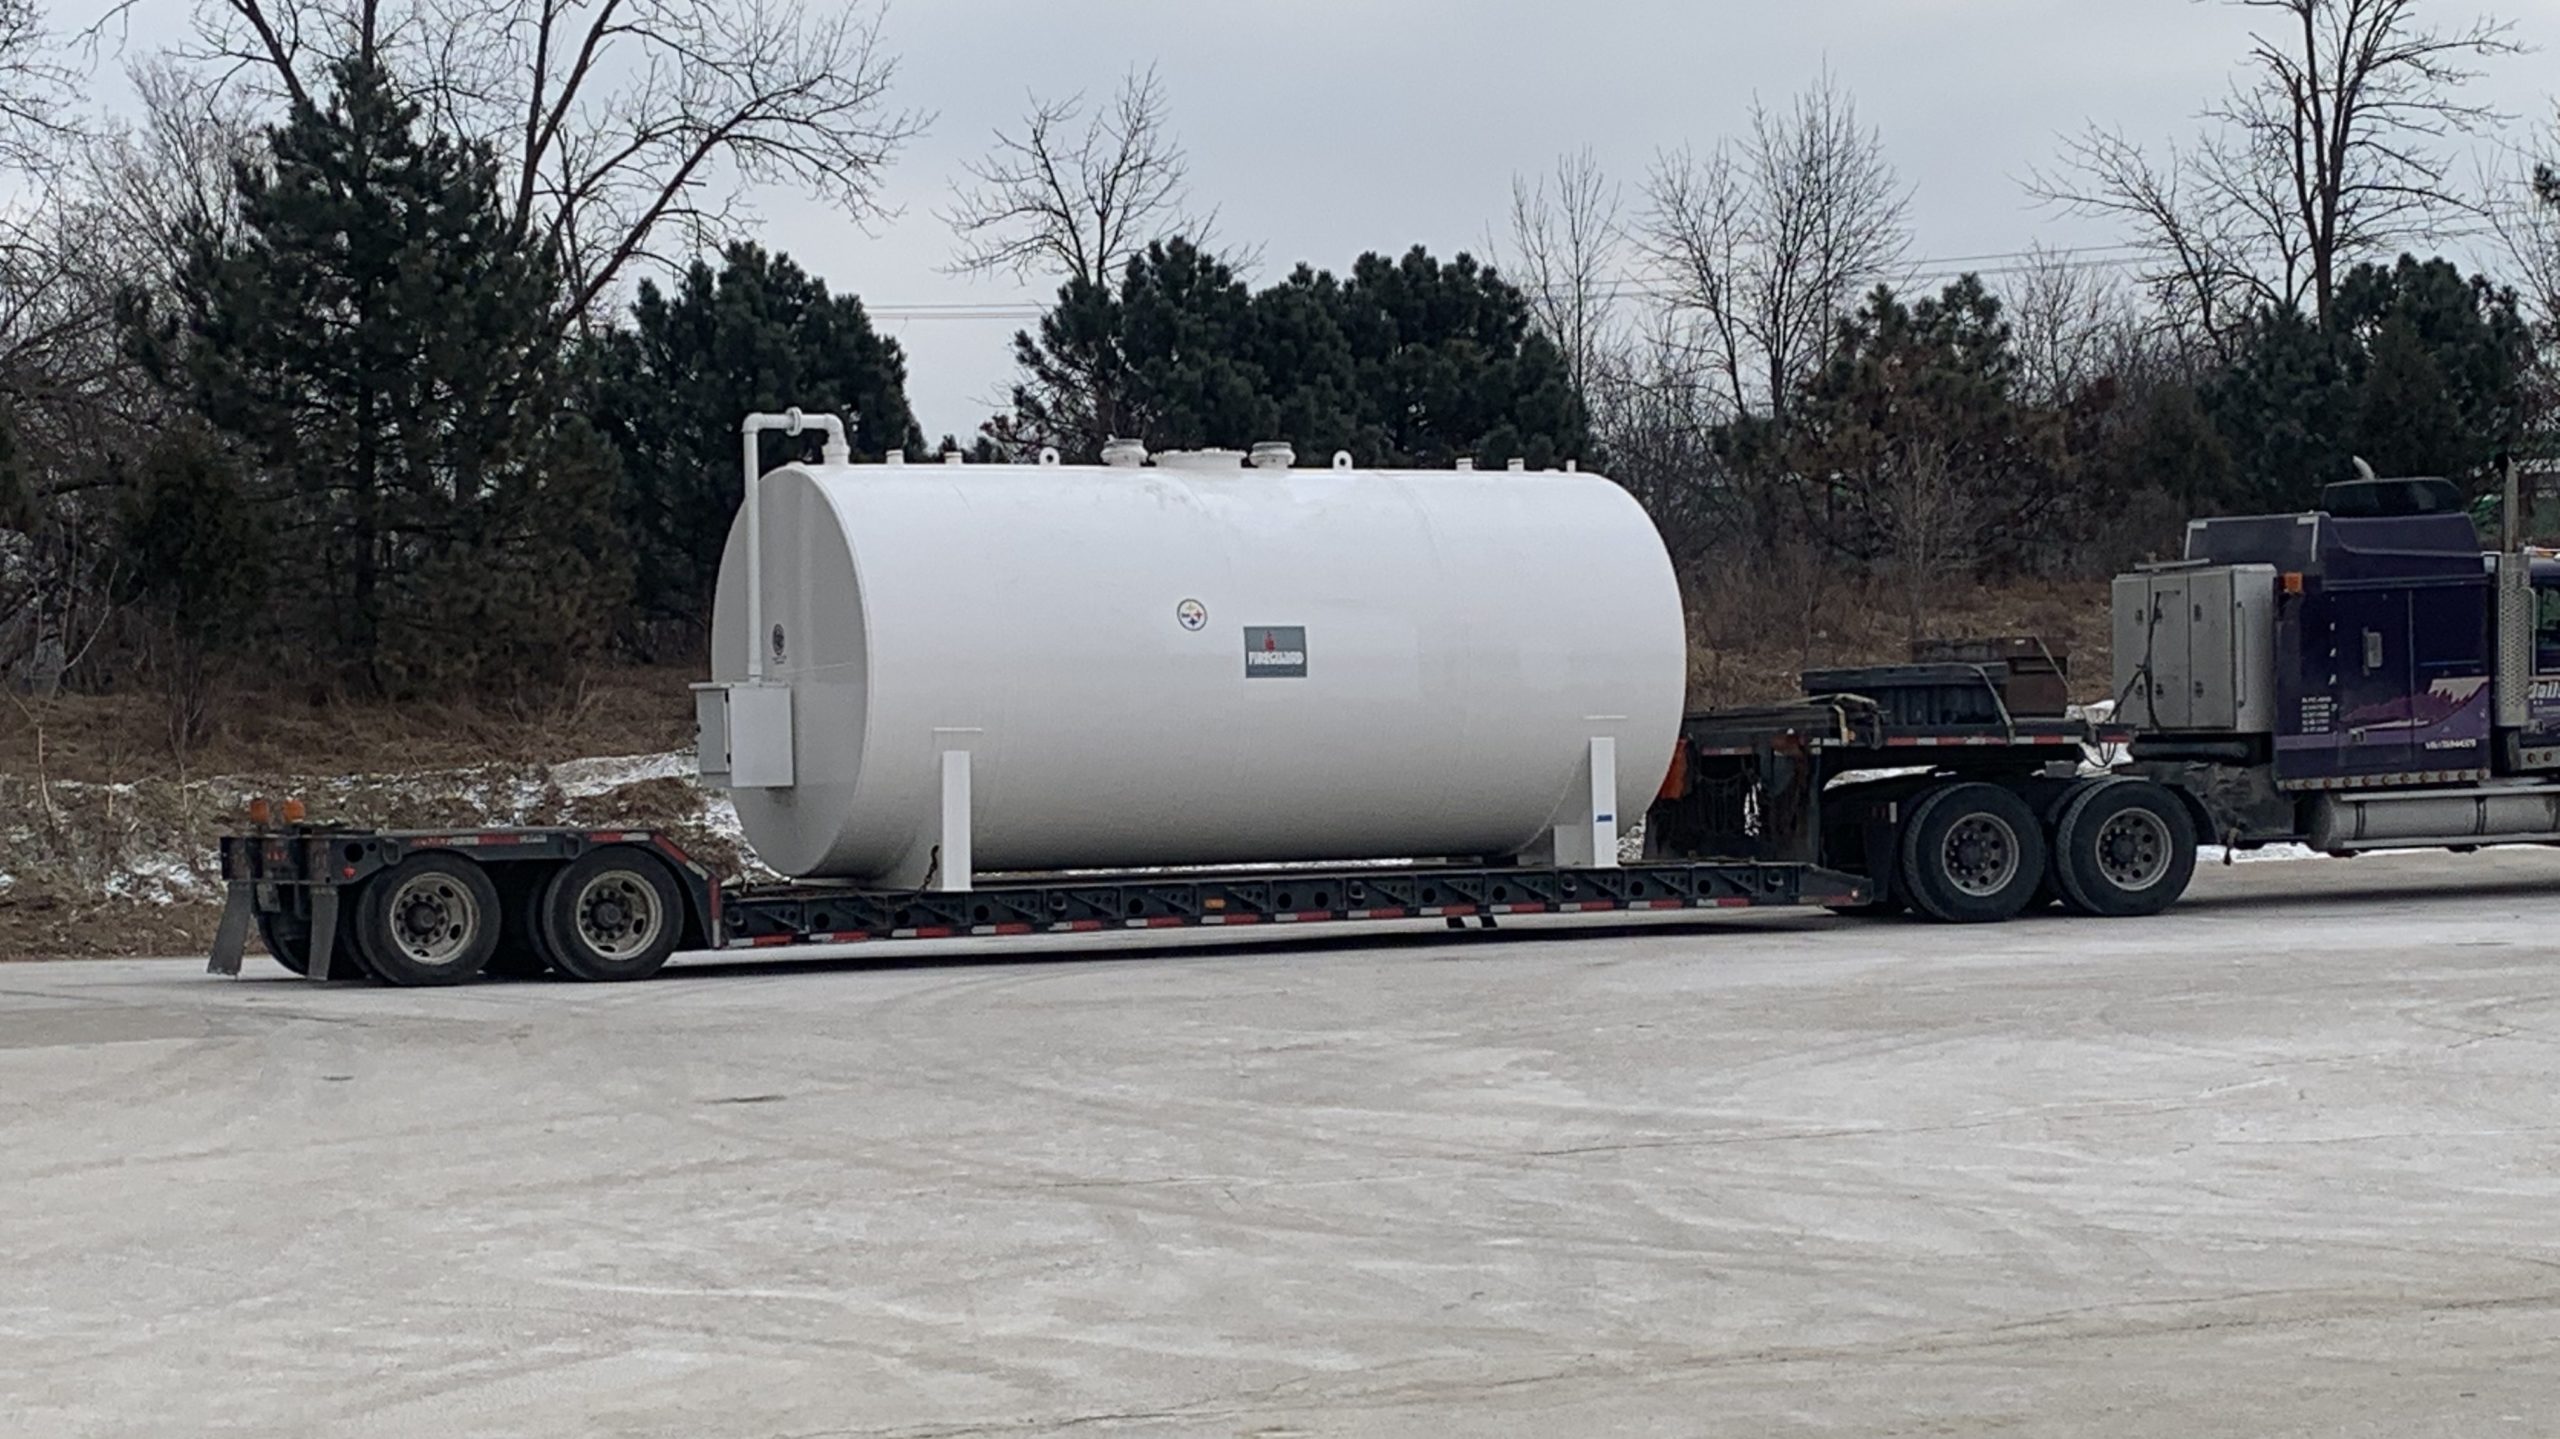 Call Lannon tank today for a quote on a new Fireguard® Tank.